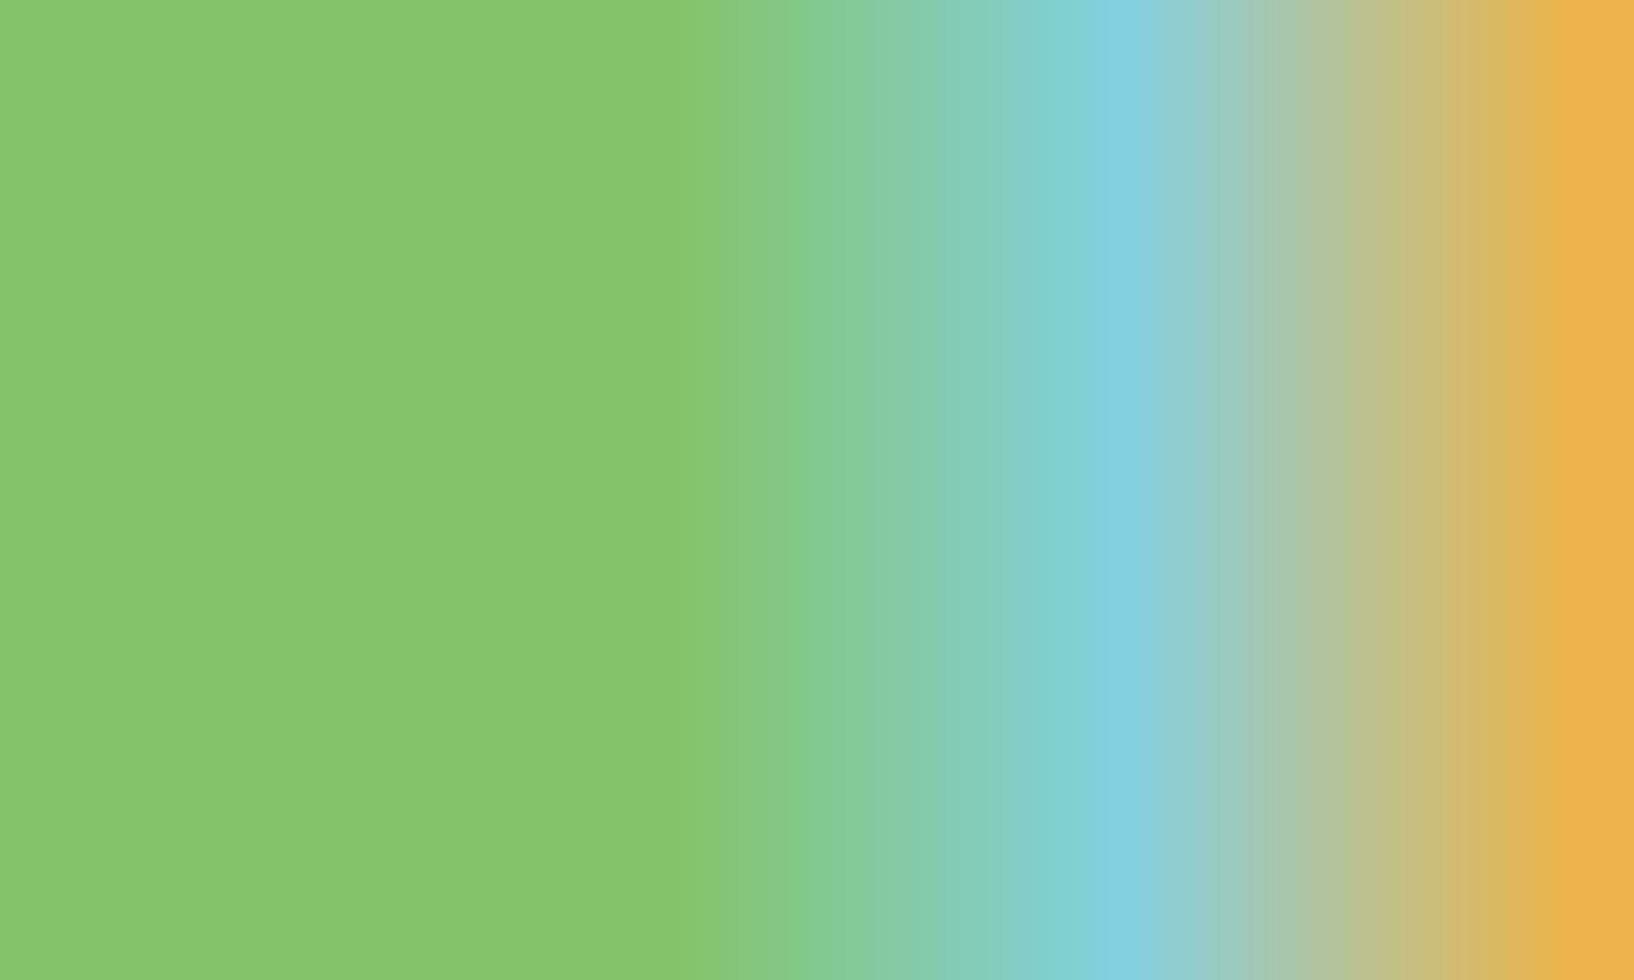 Design simple green,yellow and blue gradient color illustration background photo